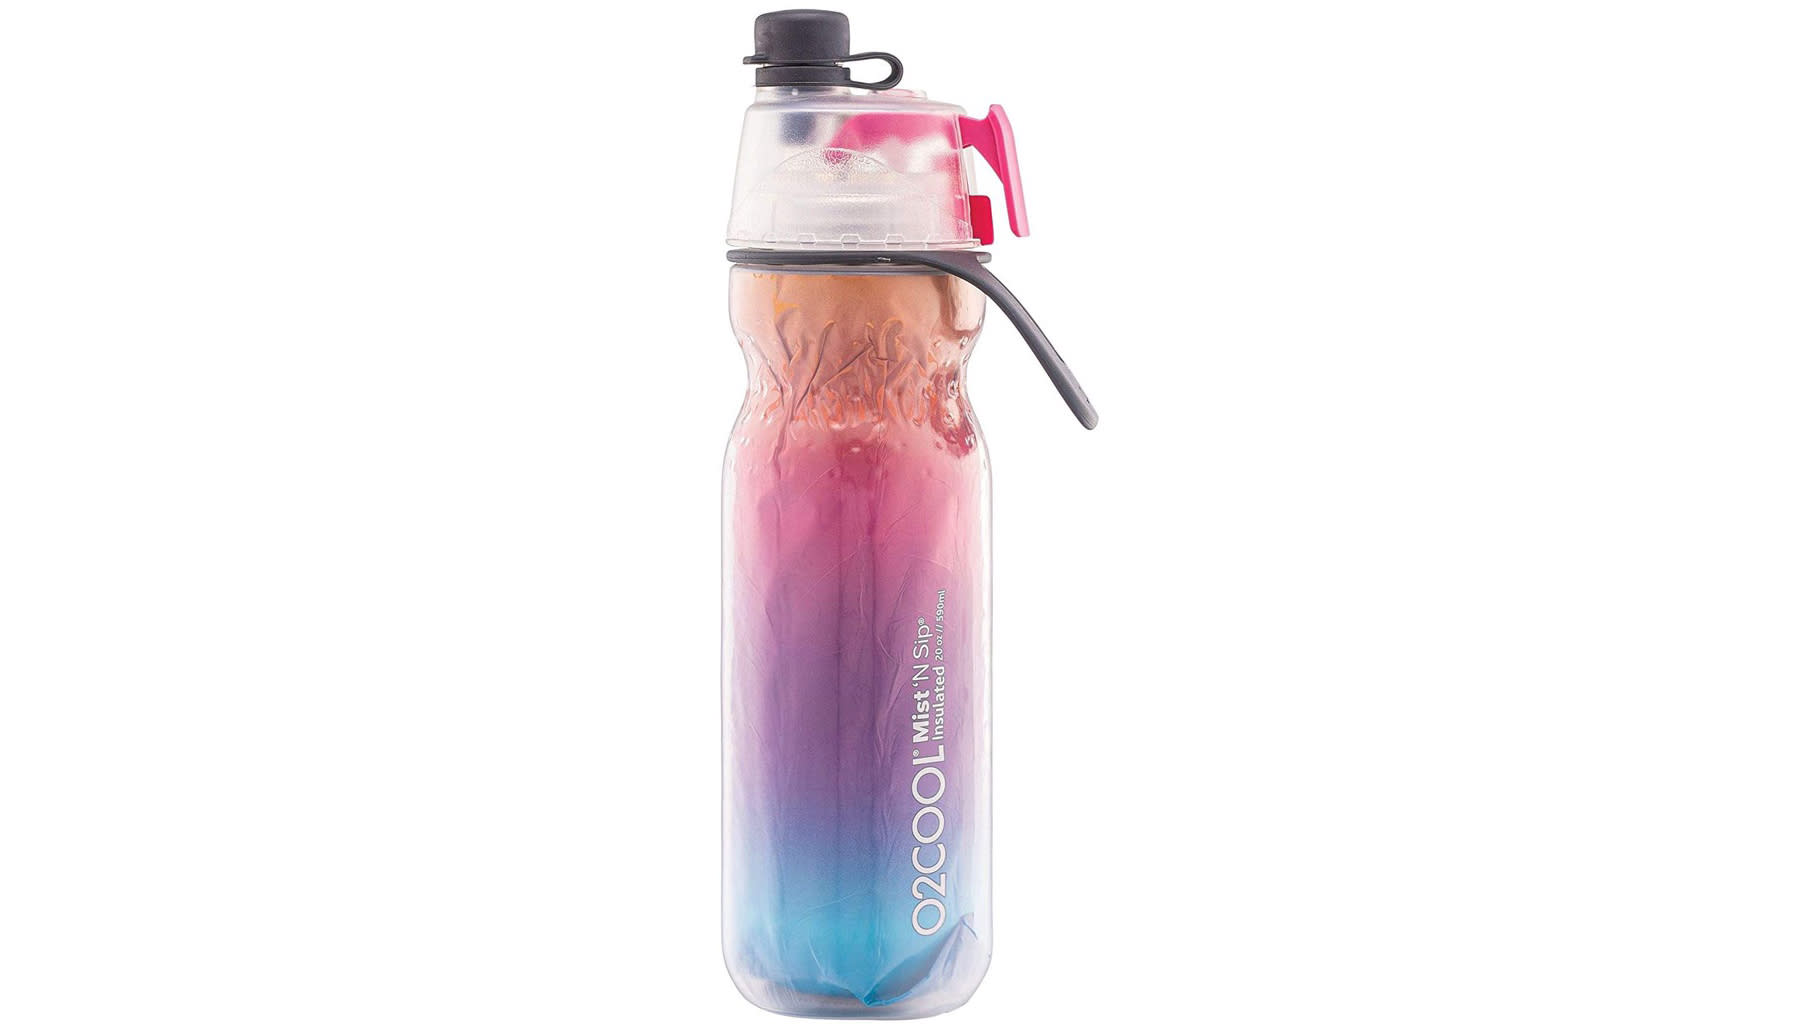 O2COOL Arctic Squeeze Mist 'N Sip Insulated Water Bottle 20oz. (Photo: Shopee SG)